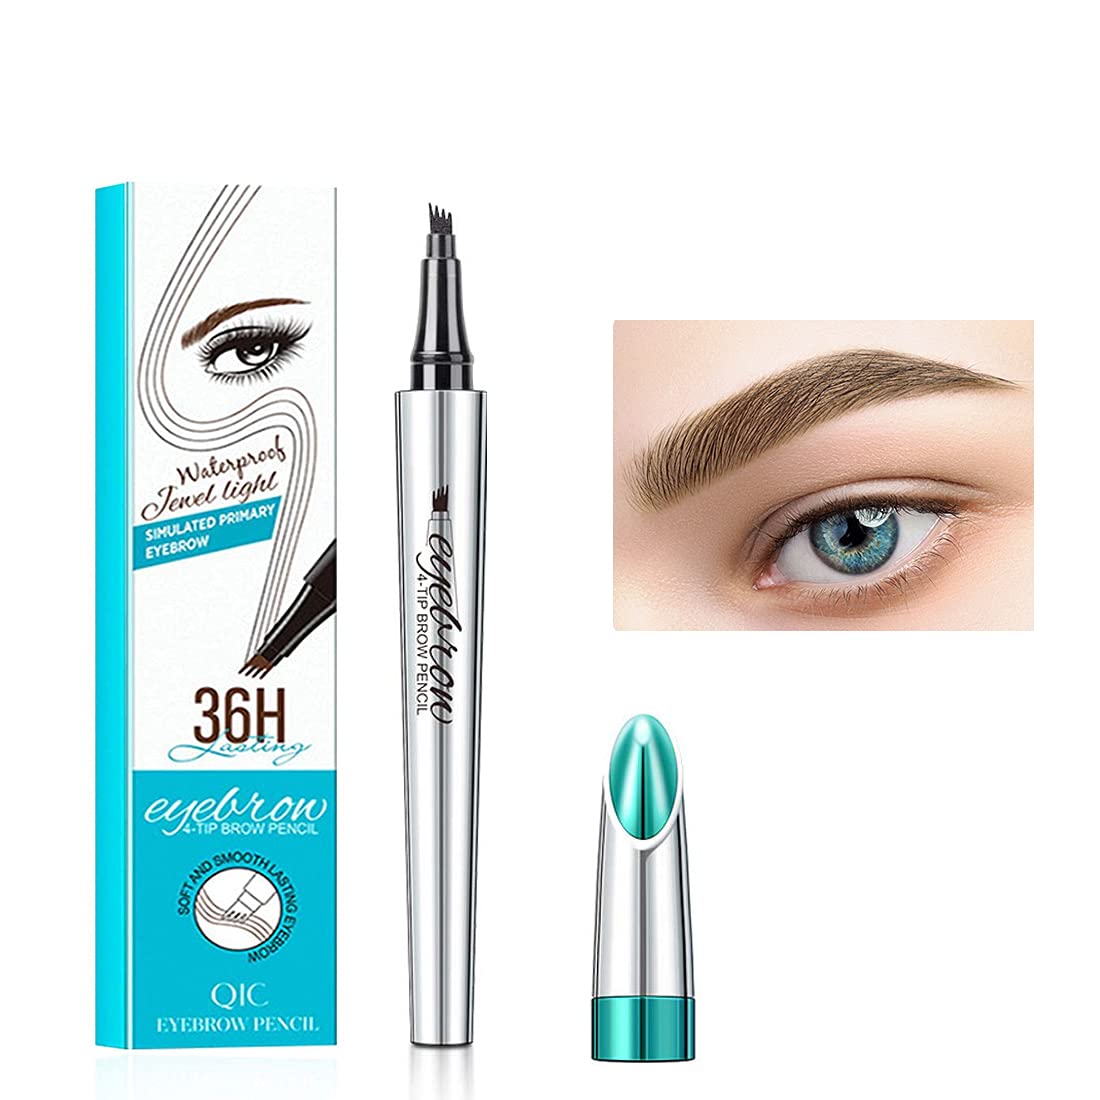 CUIFULI Eyebrow pencil, 4 point tips eyebrow make-up with micro fork tip applicator, durable water and smudge-proof eyebrow pencil, light coffee, ‎light